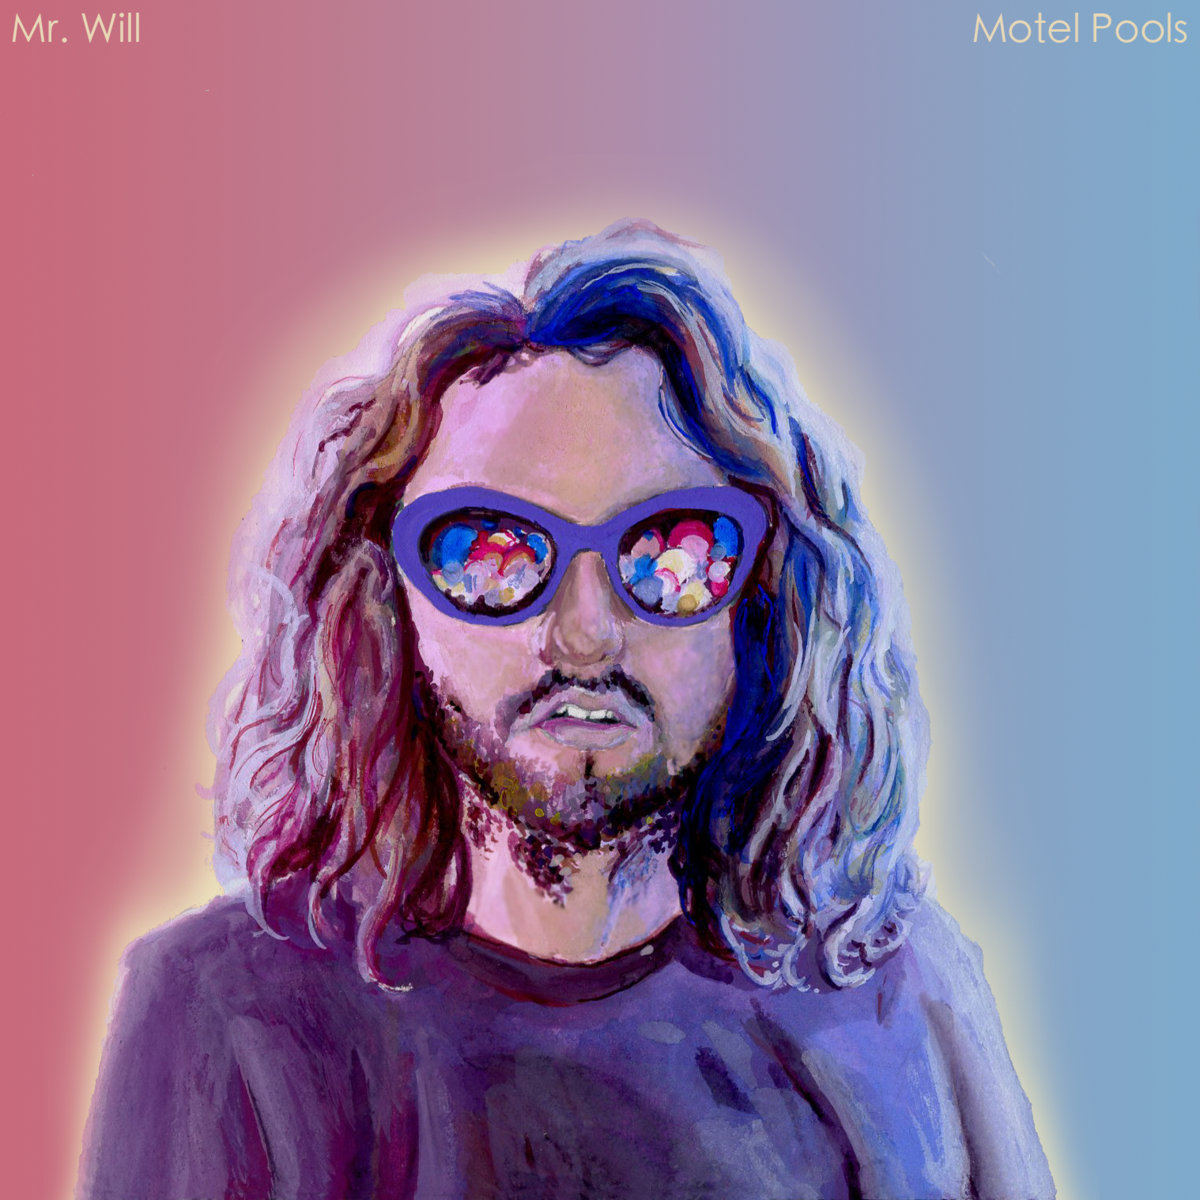 Mr. Will Shares Debut EP Motel Pools